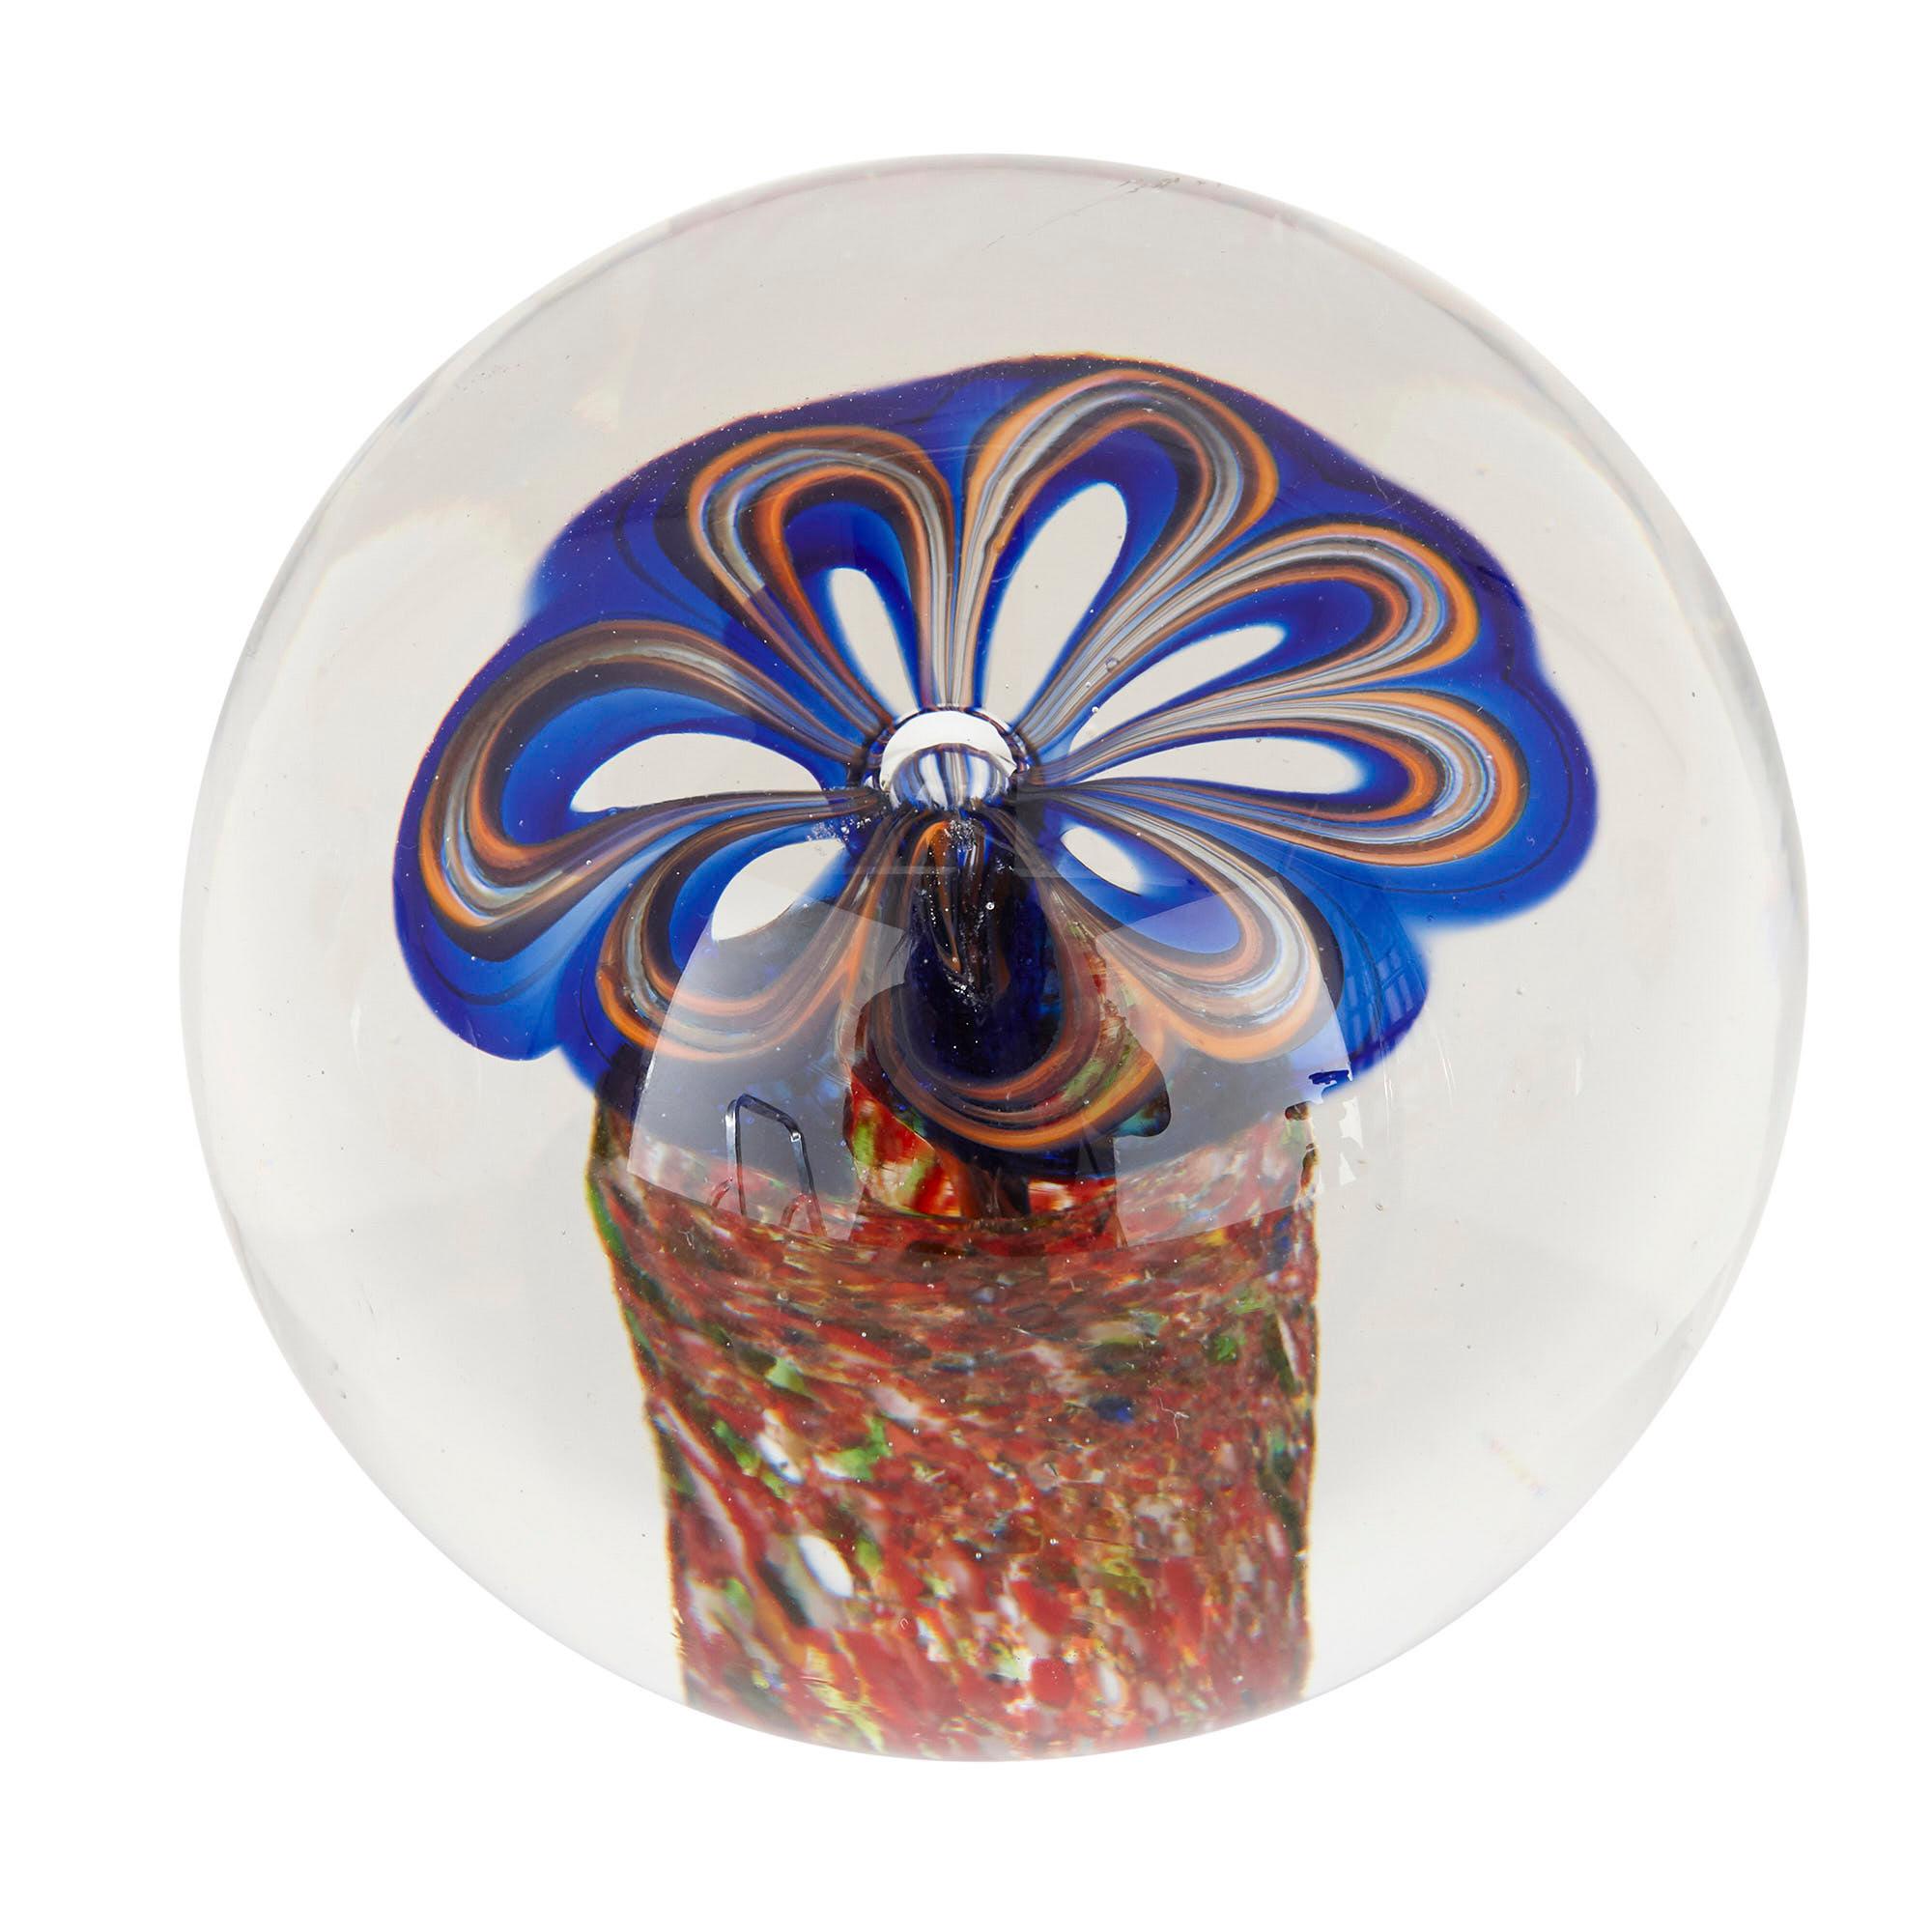 These beautiful paperweights were created in France in the 20th century. Glass paperweights began to be widely collected in the mid-19th century, after they were showcased at the International Exhibitions of the period. Paperweights like these are